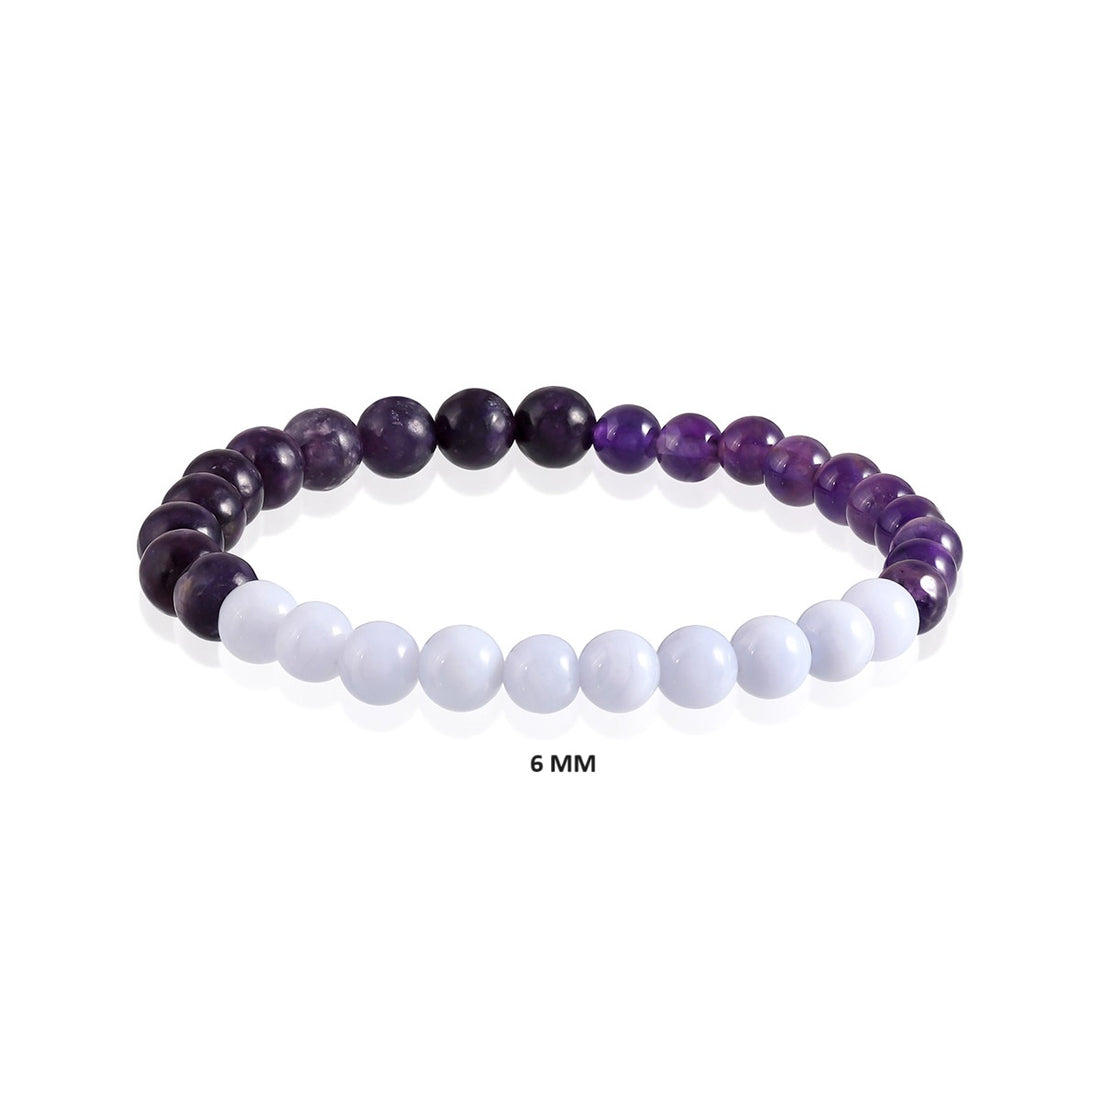 Stylish composition showcasing the Allergy Relief Bracelet with healing gemstone beads.